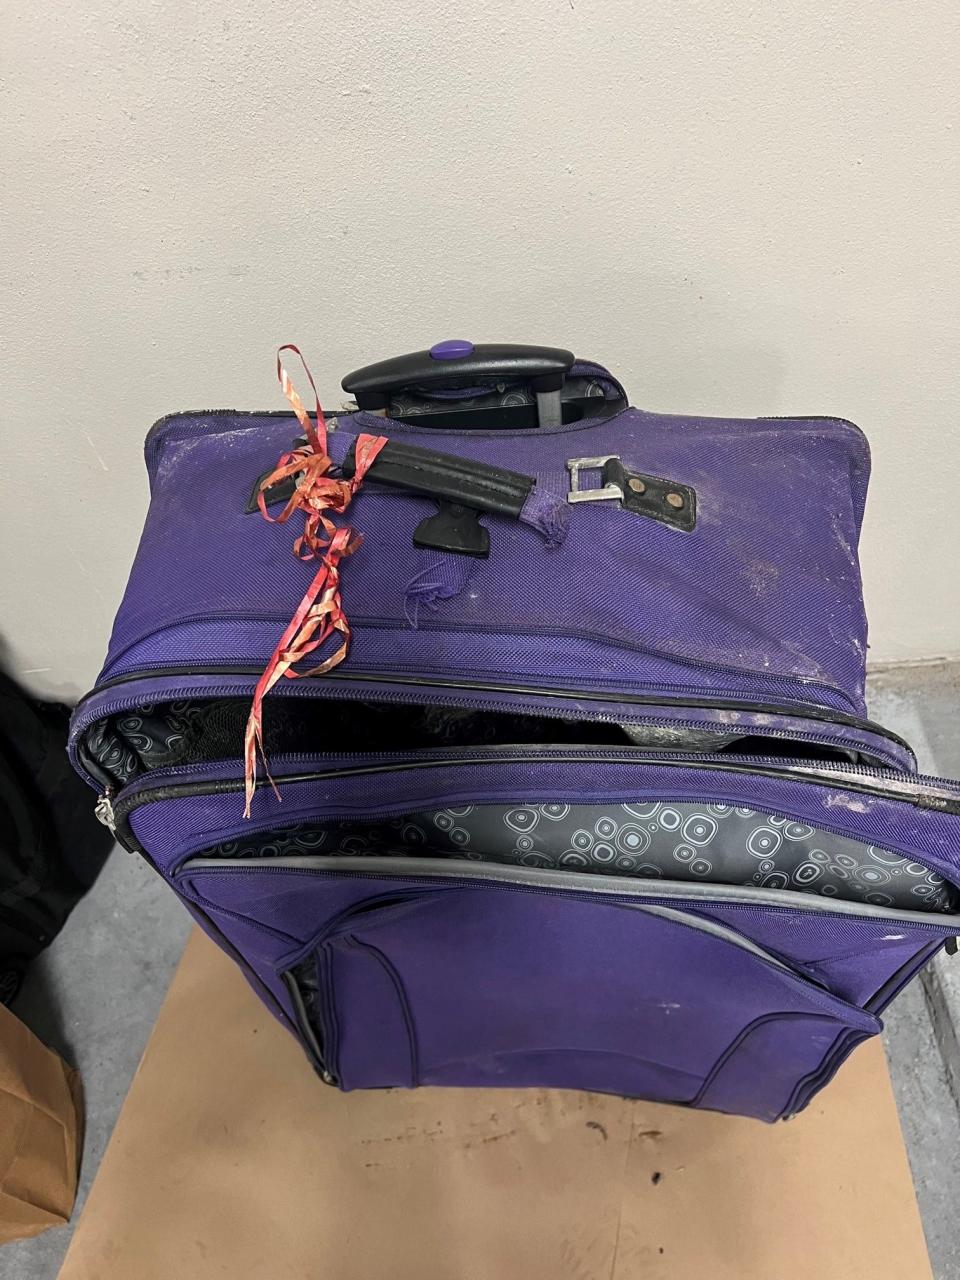 Delray Beach police released a photo of this suitcase, which they described as a purple Palm Springs Ricardo Beverly Hills bag, in which body parts of Aydil Barbosa Fontes were found.